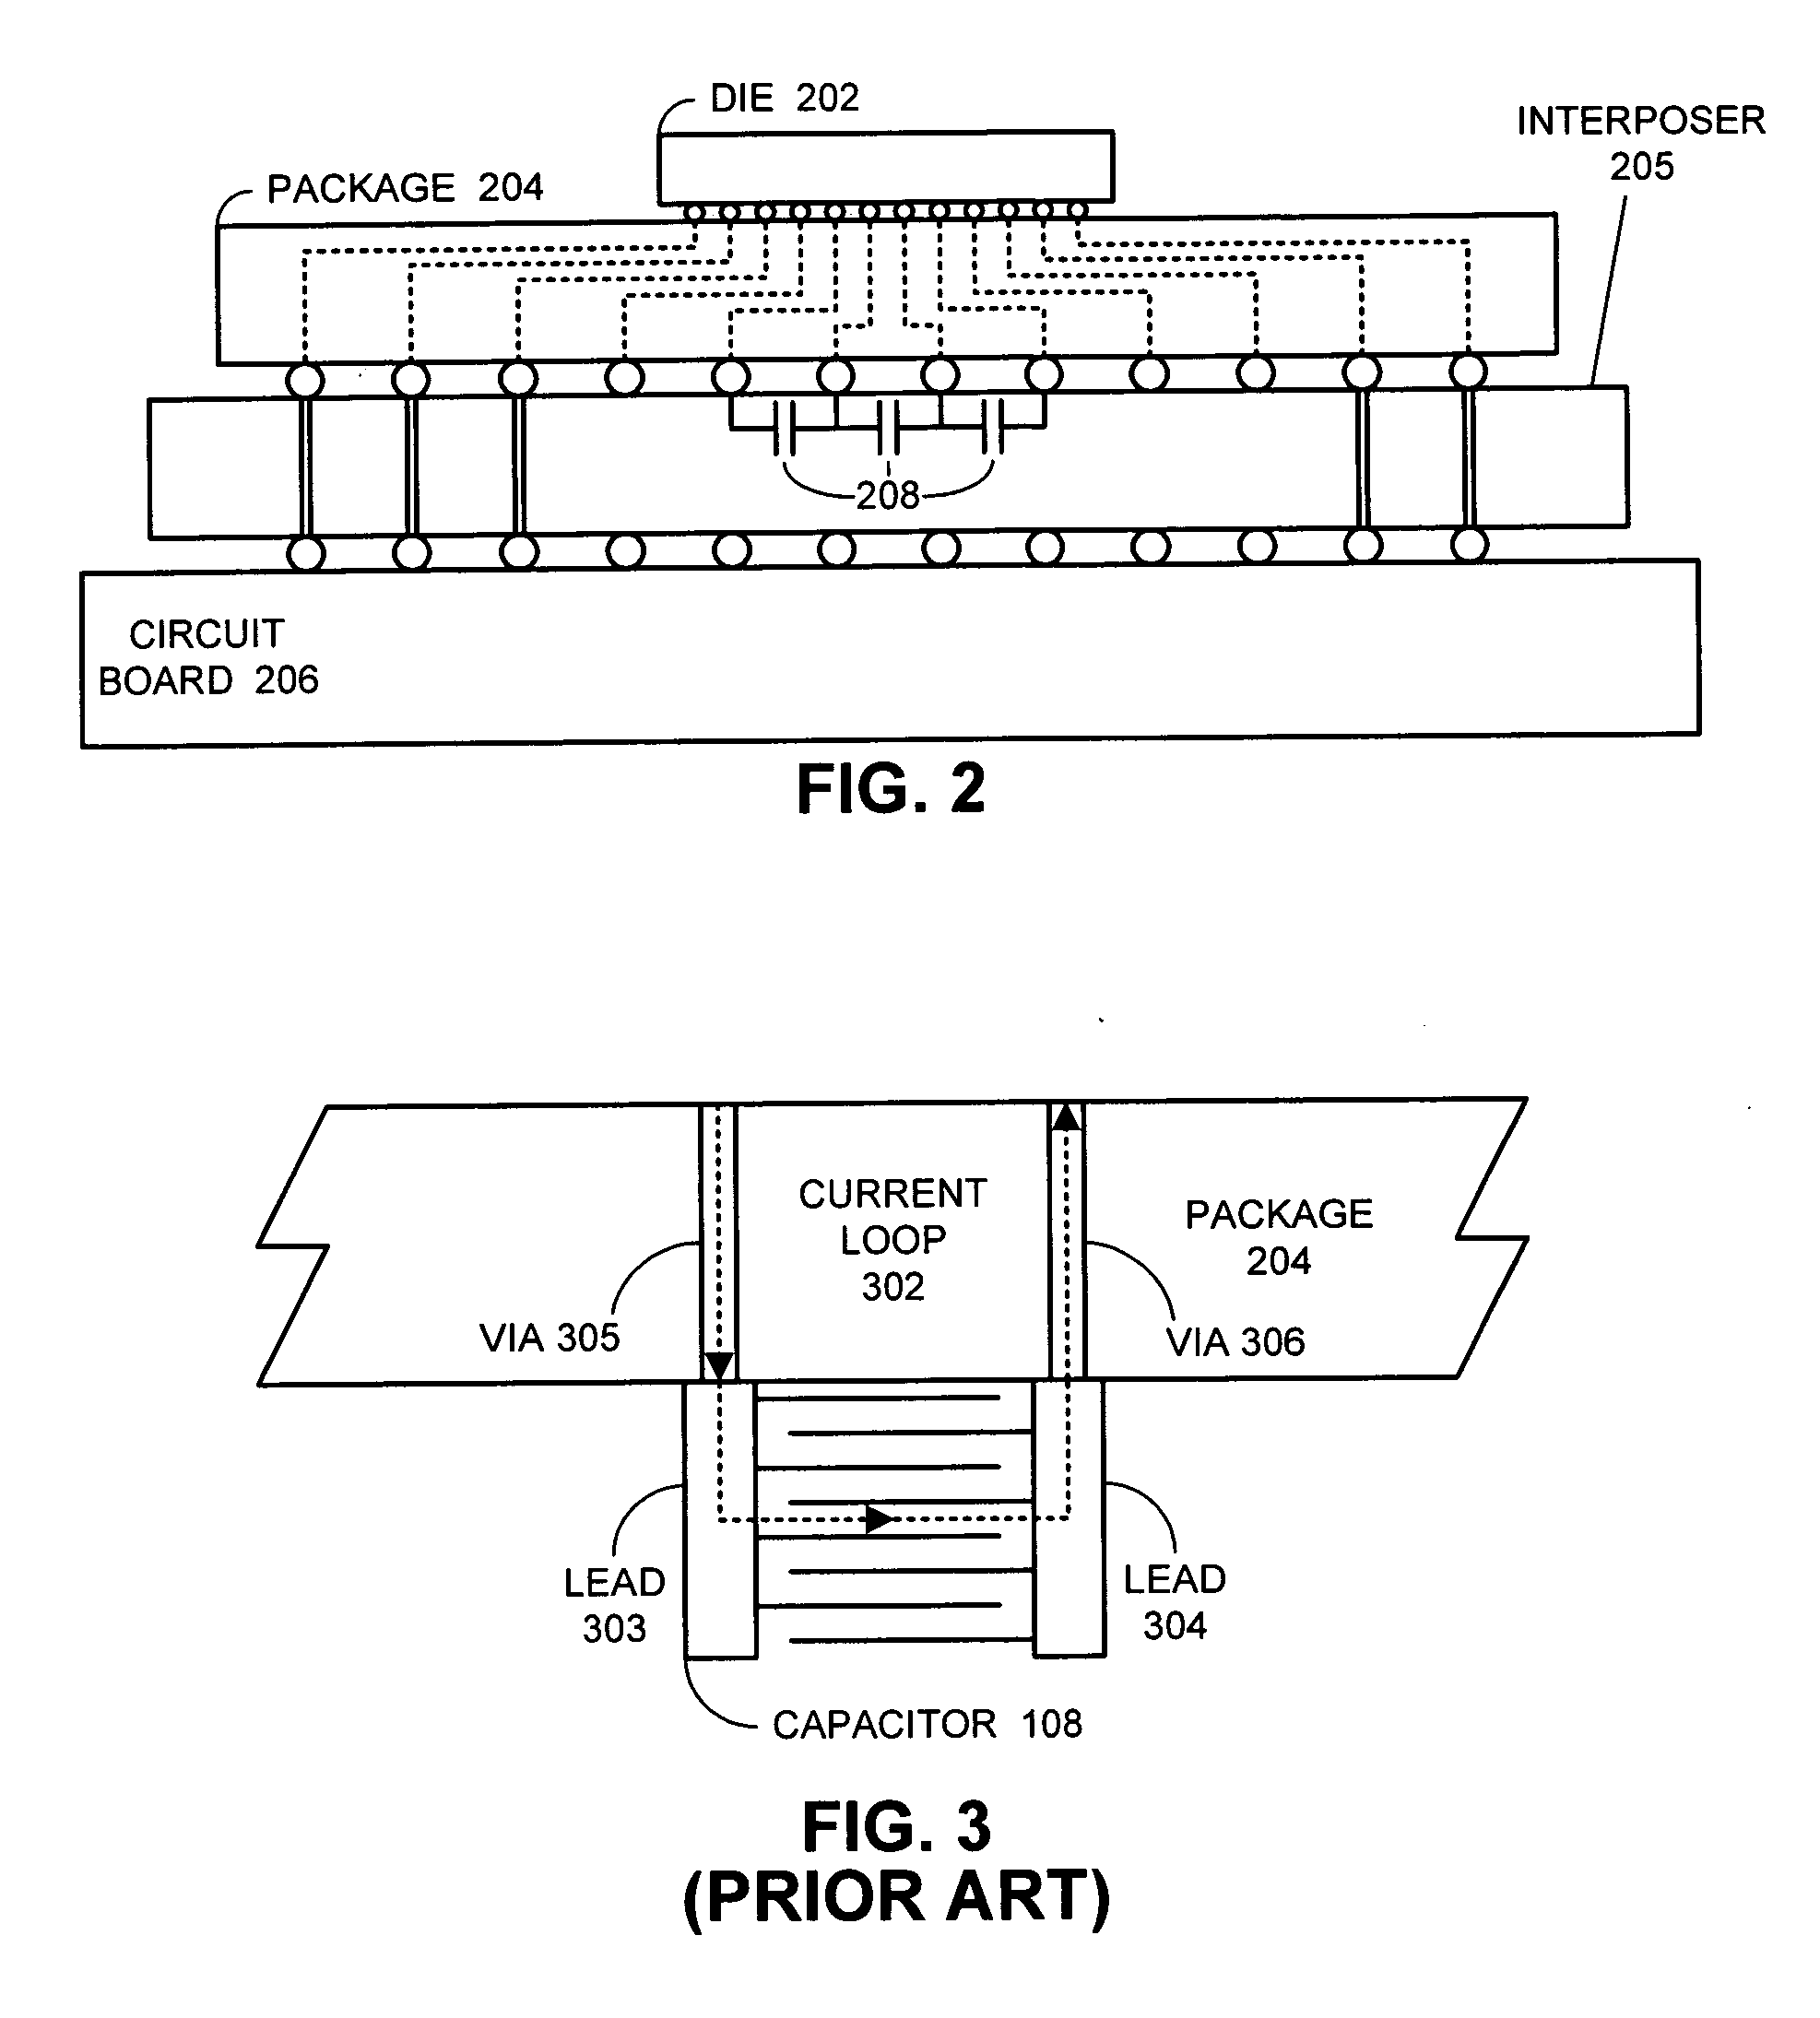 Interposer containing bypass capacitors for reducing voltage noise in an IC device